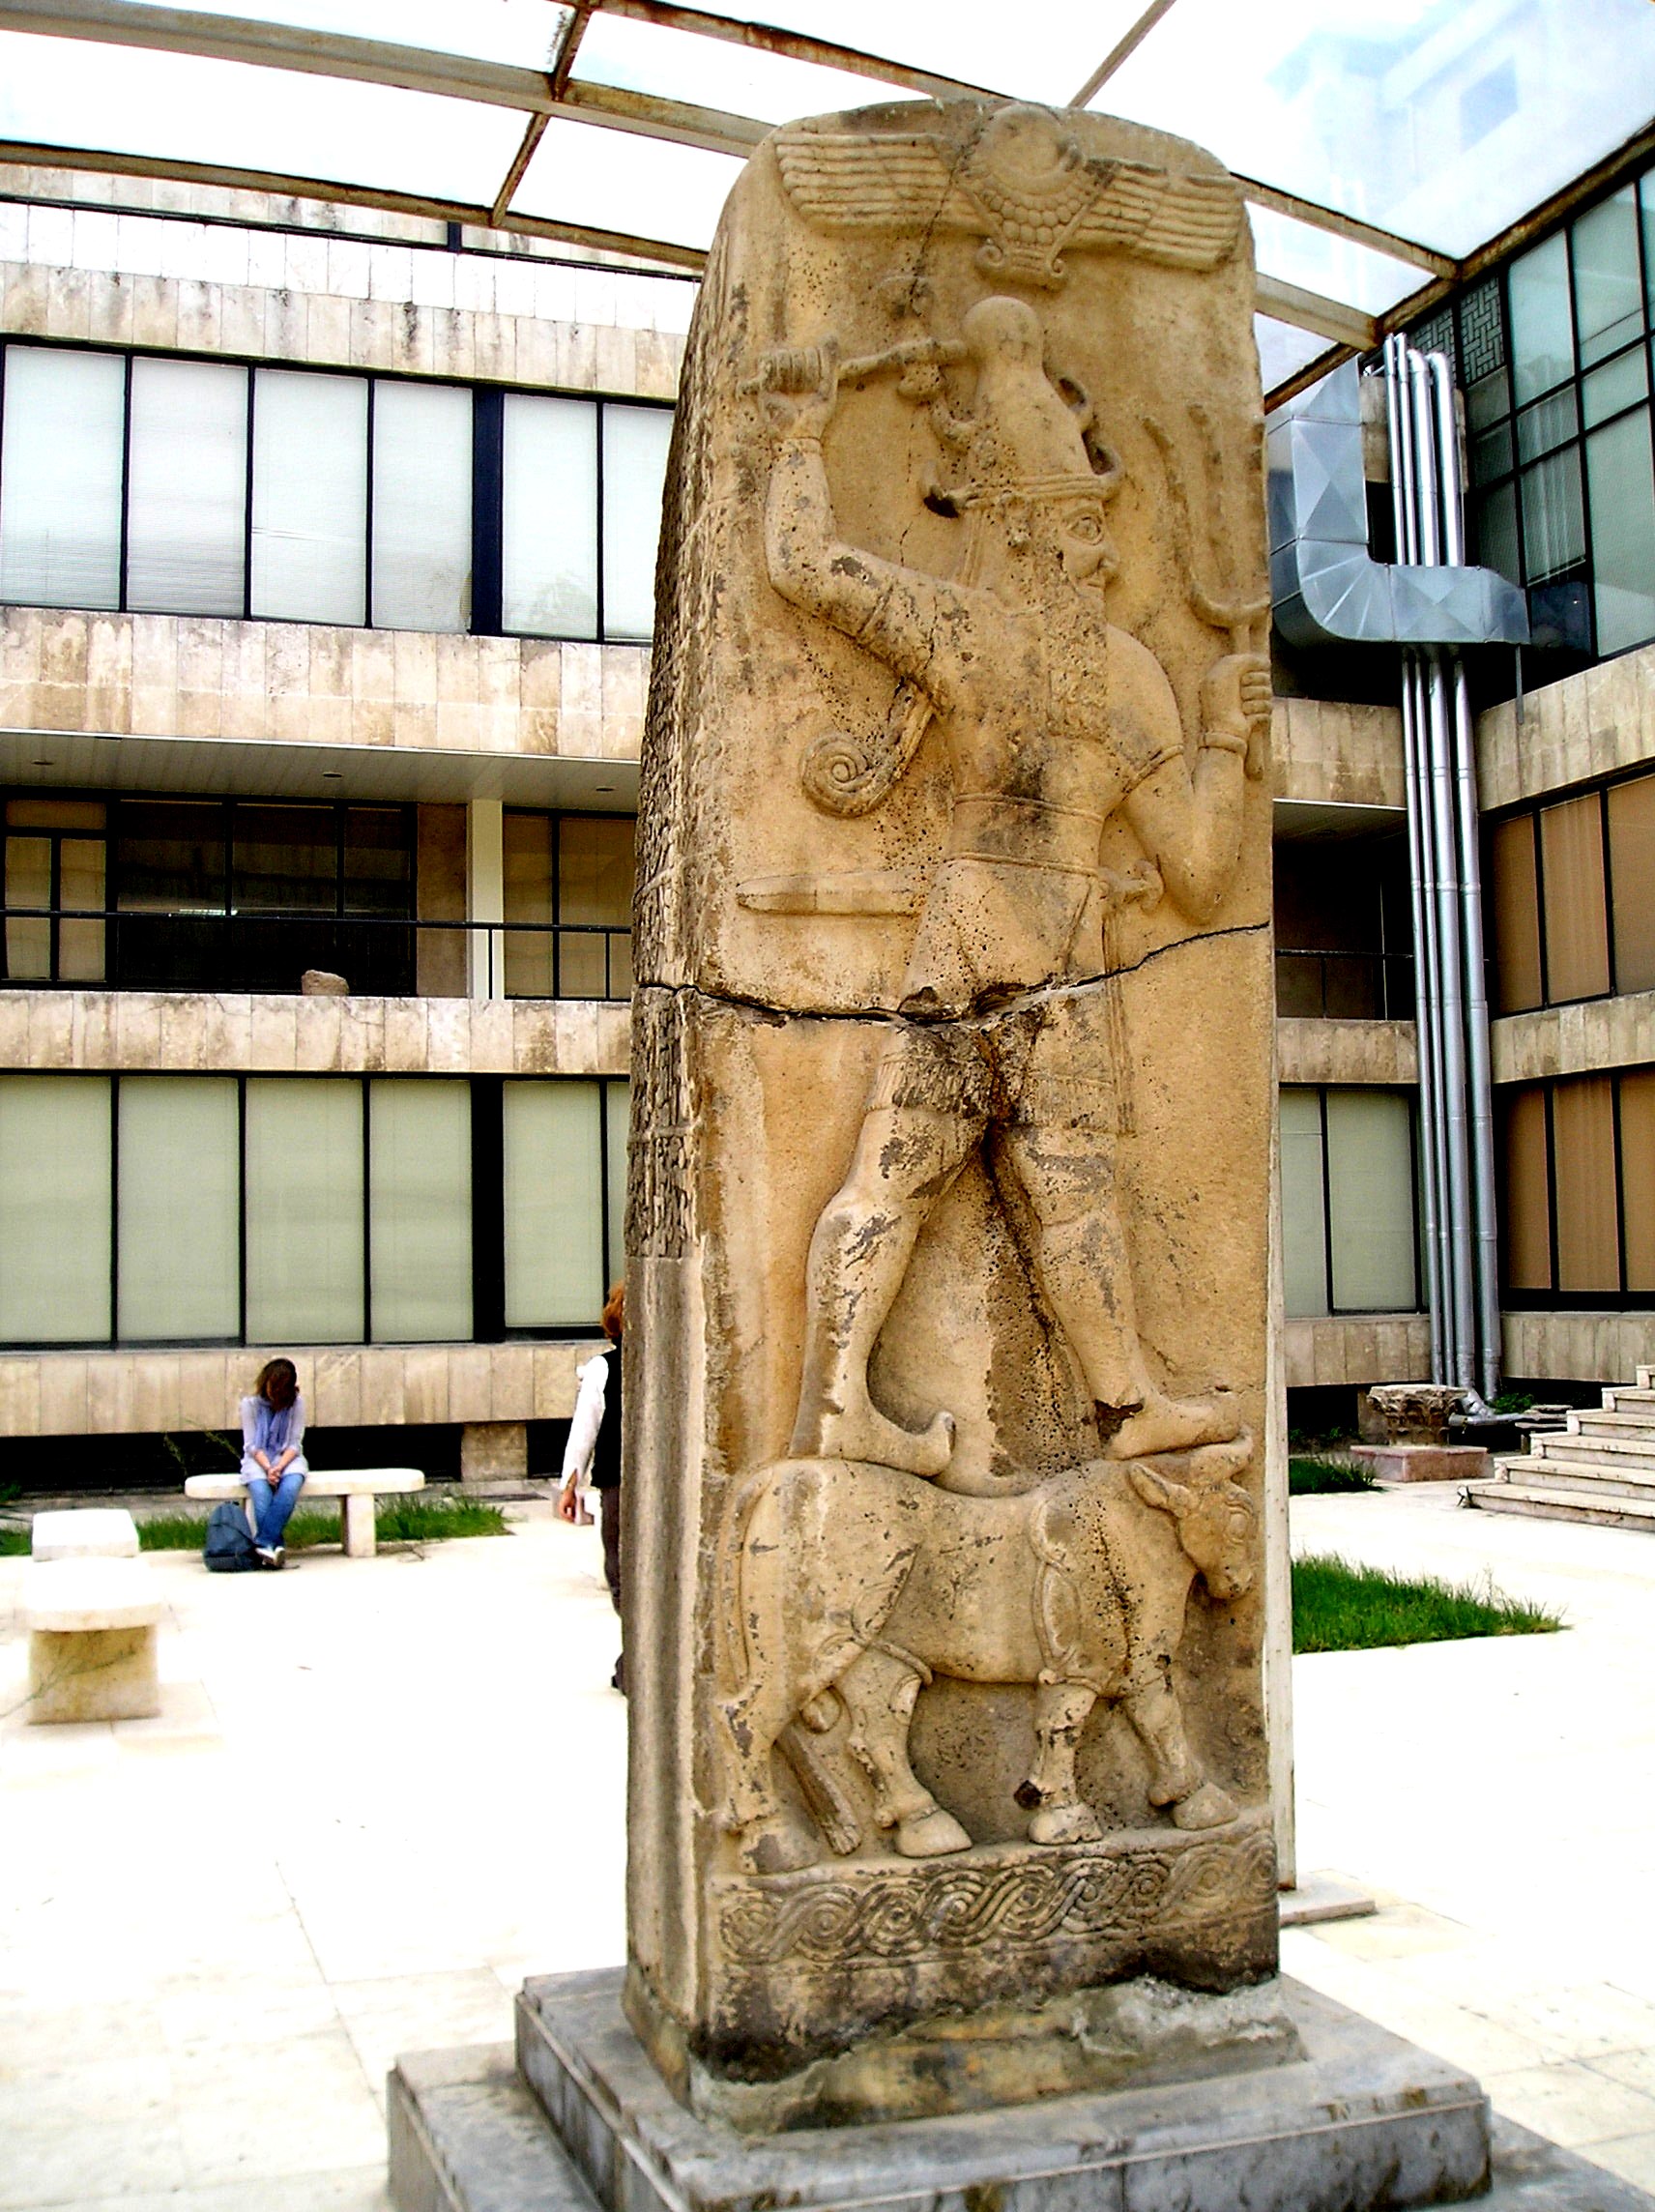 Adad atop his zodiac symbol of Taurus the Bull, artifact in Aleppo, now destroyed by Radical Islam